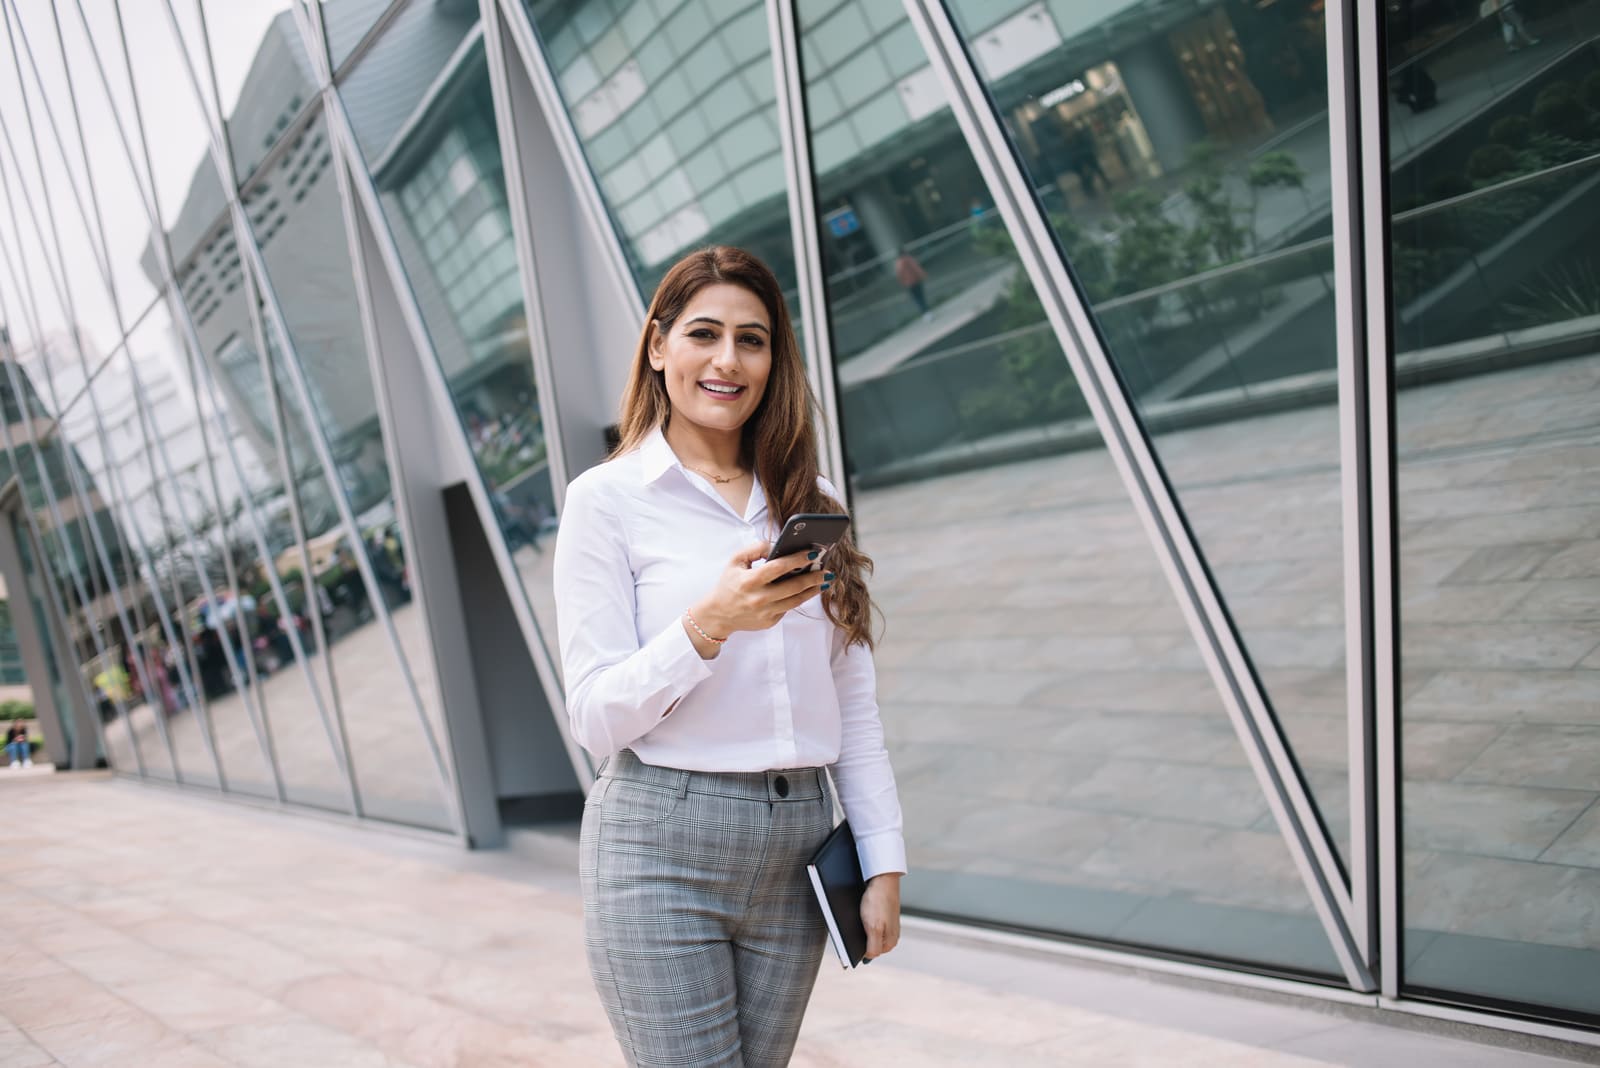 a business smiling woman in a white shirt standing outside with a cell phone in her hand